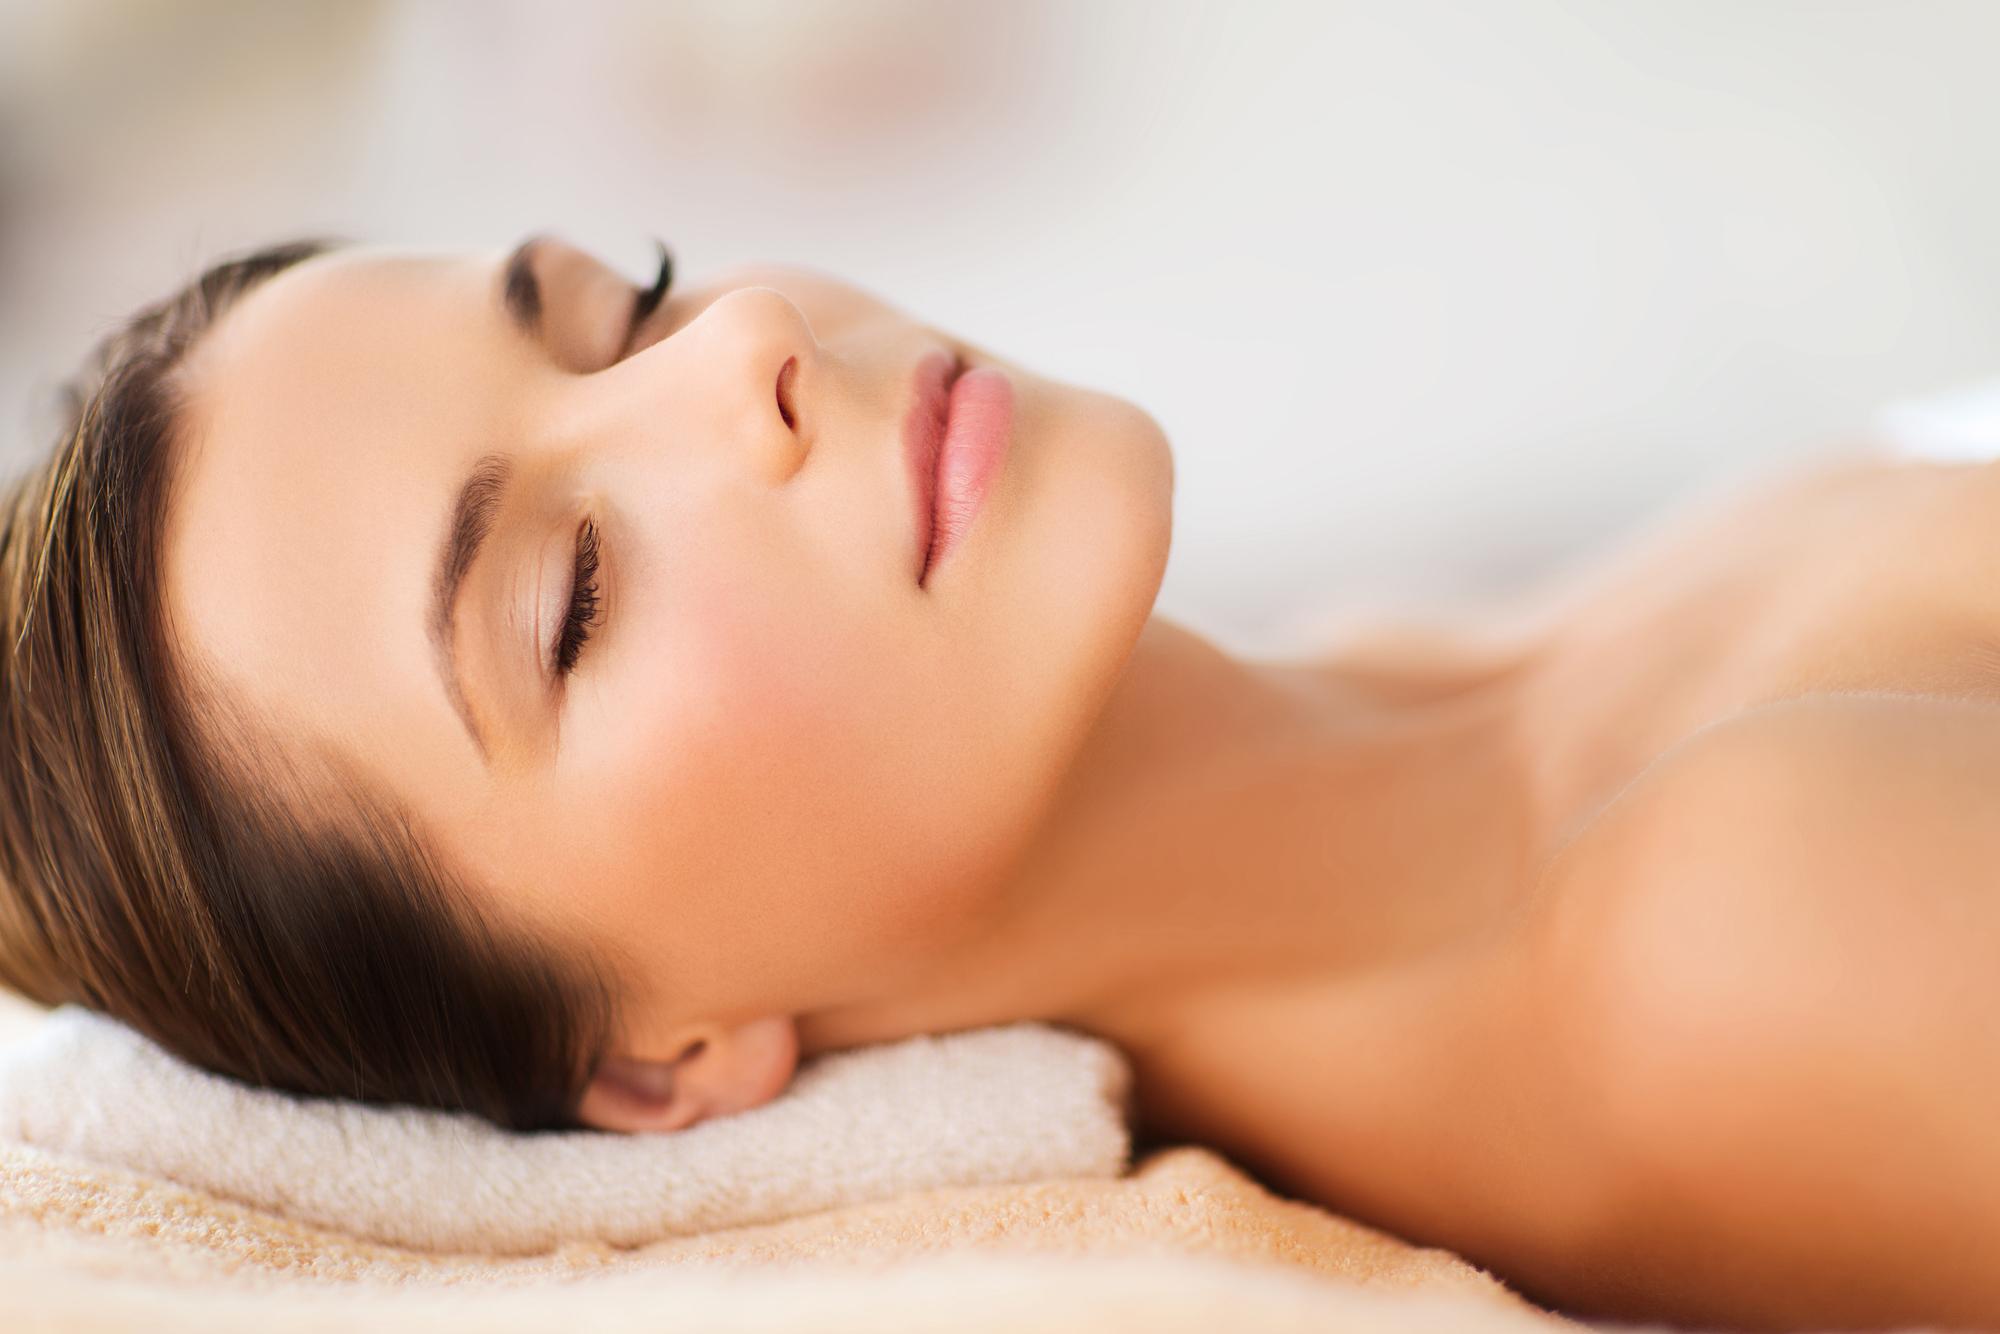 Get Anti Aging Chemical Peels To Reduce Fine Lines At This Rock Hill, SC Spa